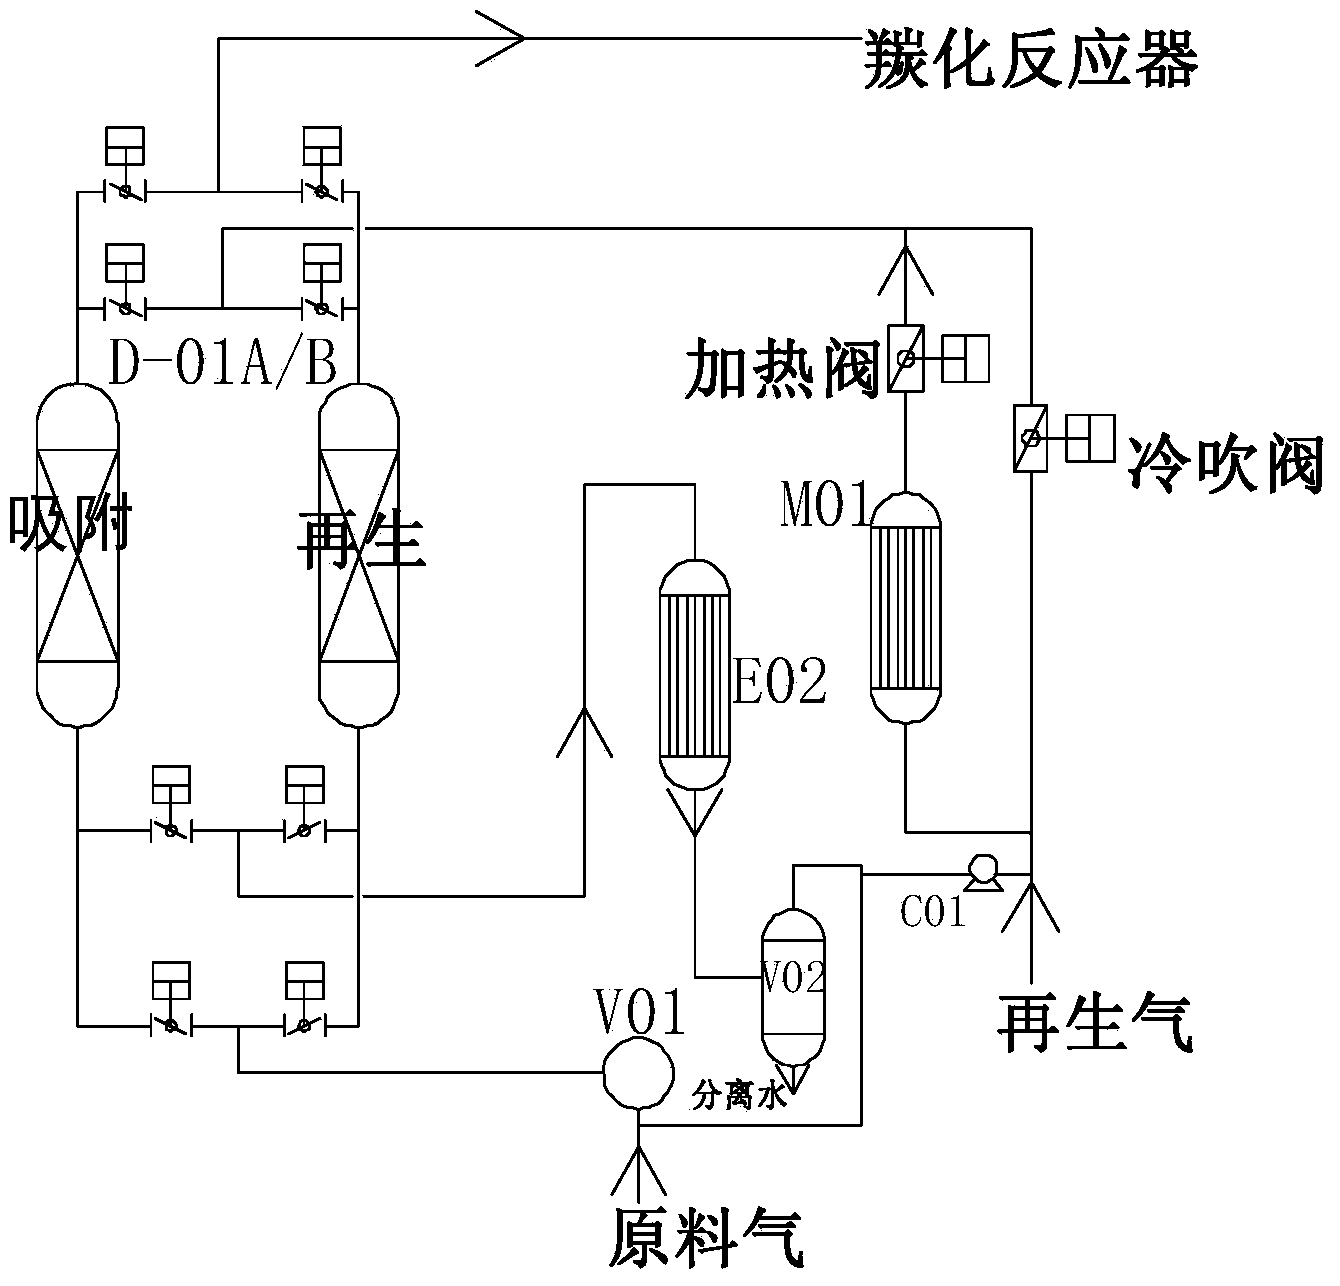 Method and device for producing and synthesizing ethylene glycol by using coal as raw material